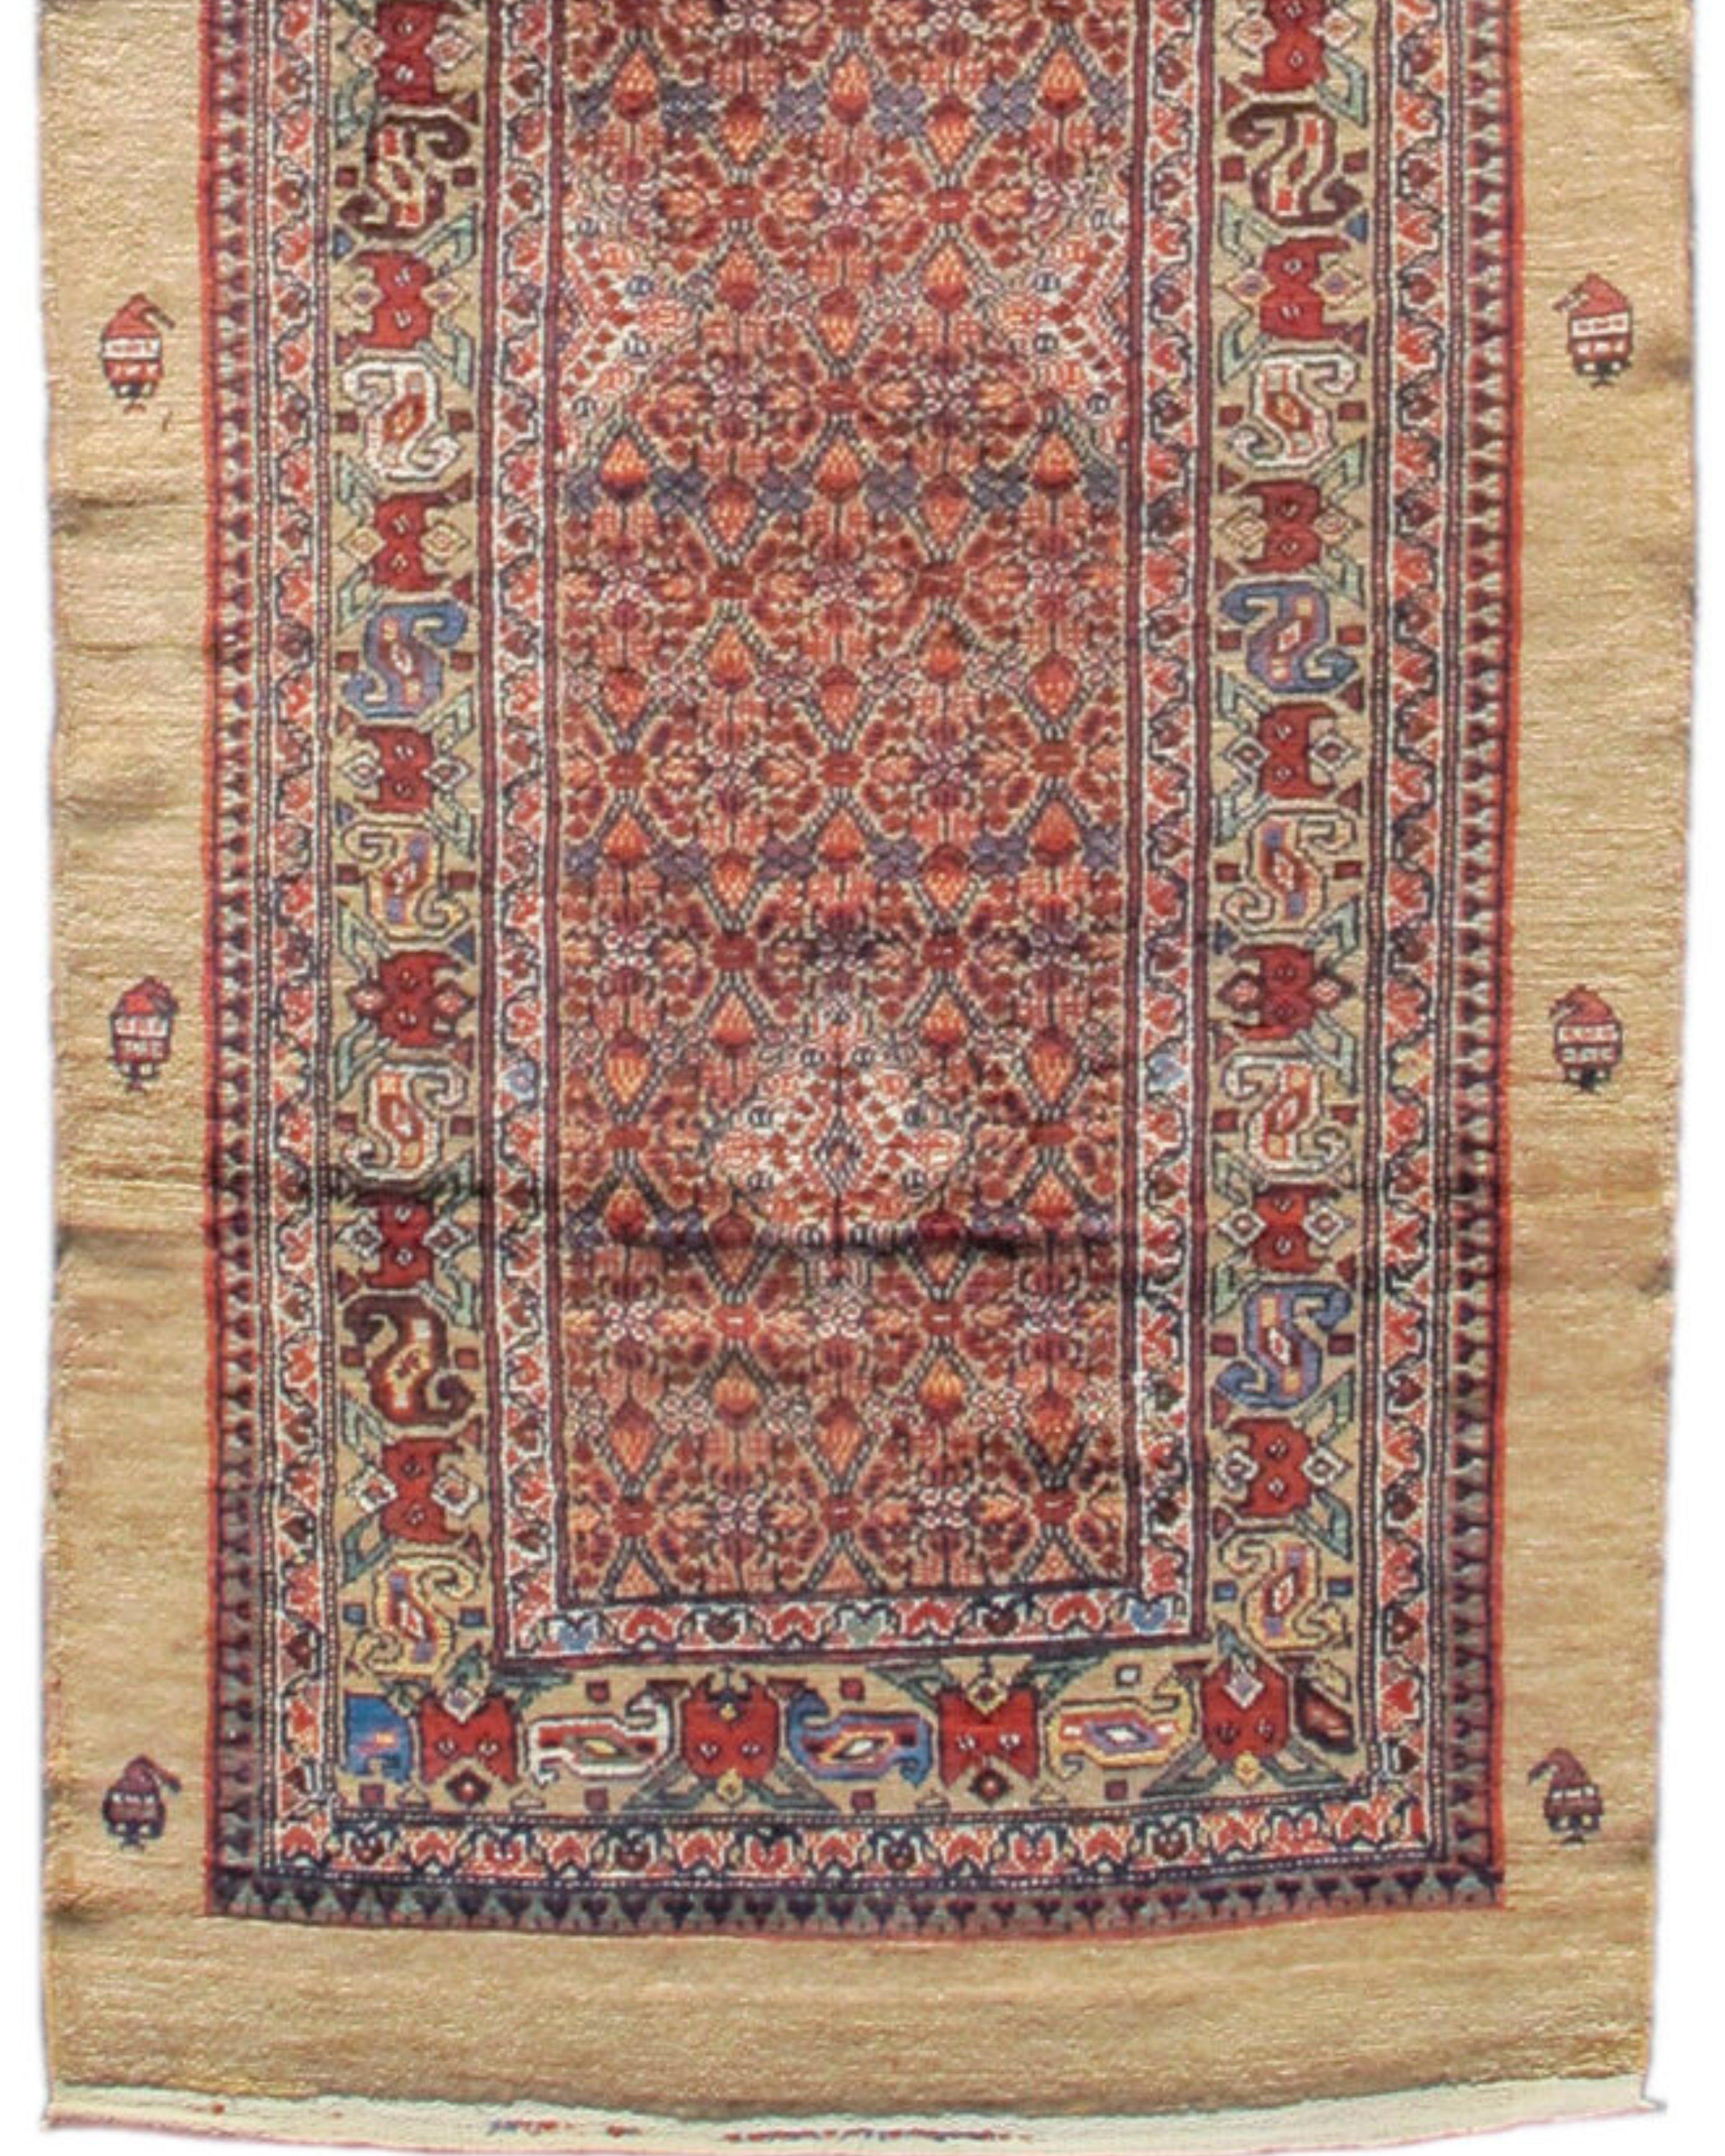 Camel Hair Hamadan Runner Rug, Early 20th century In Excellent Condition For Sale In San Francisco, CA